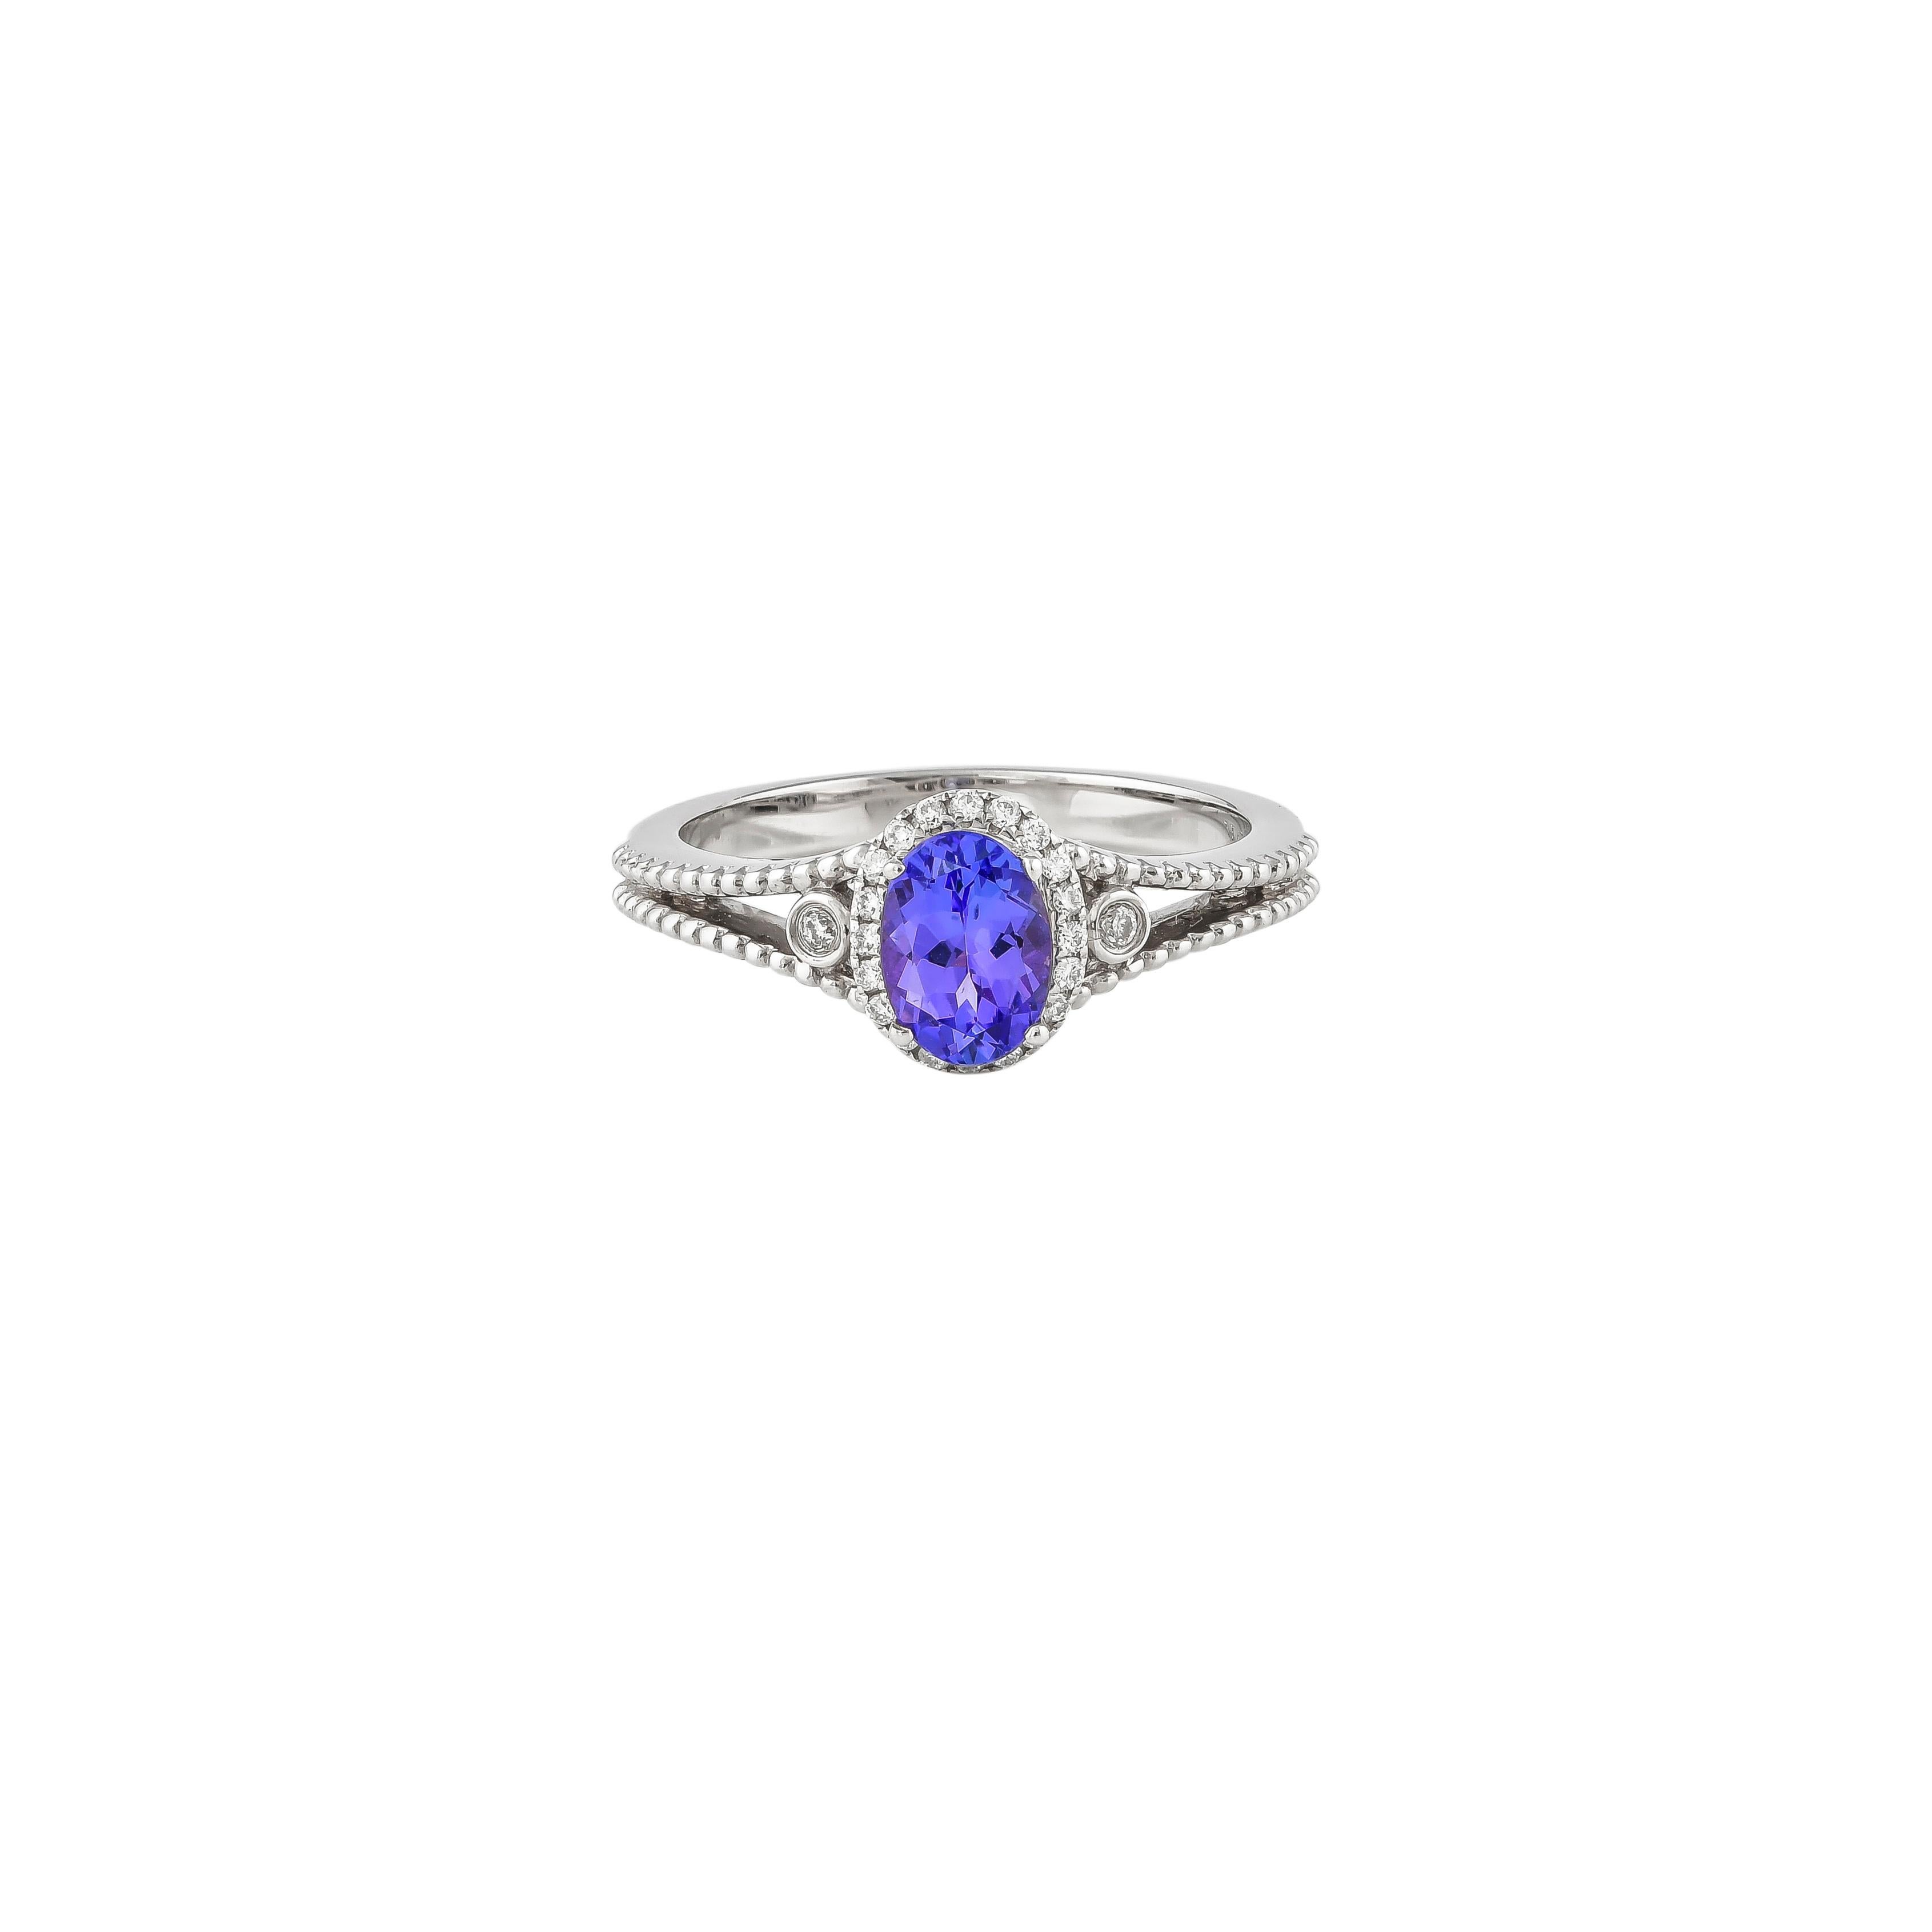 Oval Cut 0.8 Carat Tanzanite and White Diamond Ring in 18 Karat White Gold with Milgrain For Sale